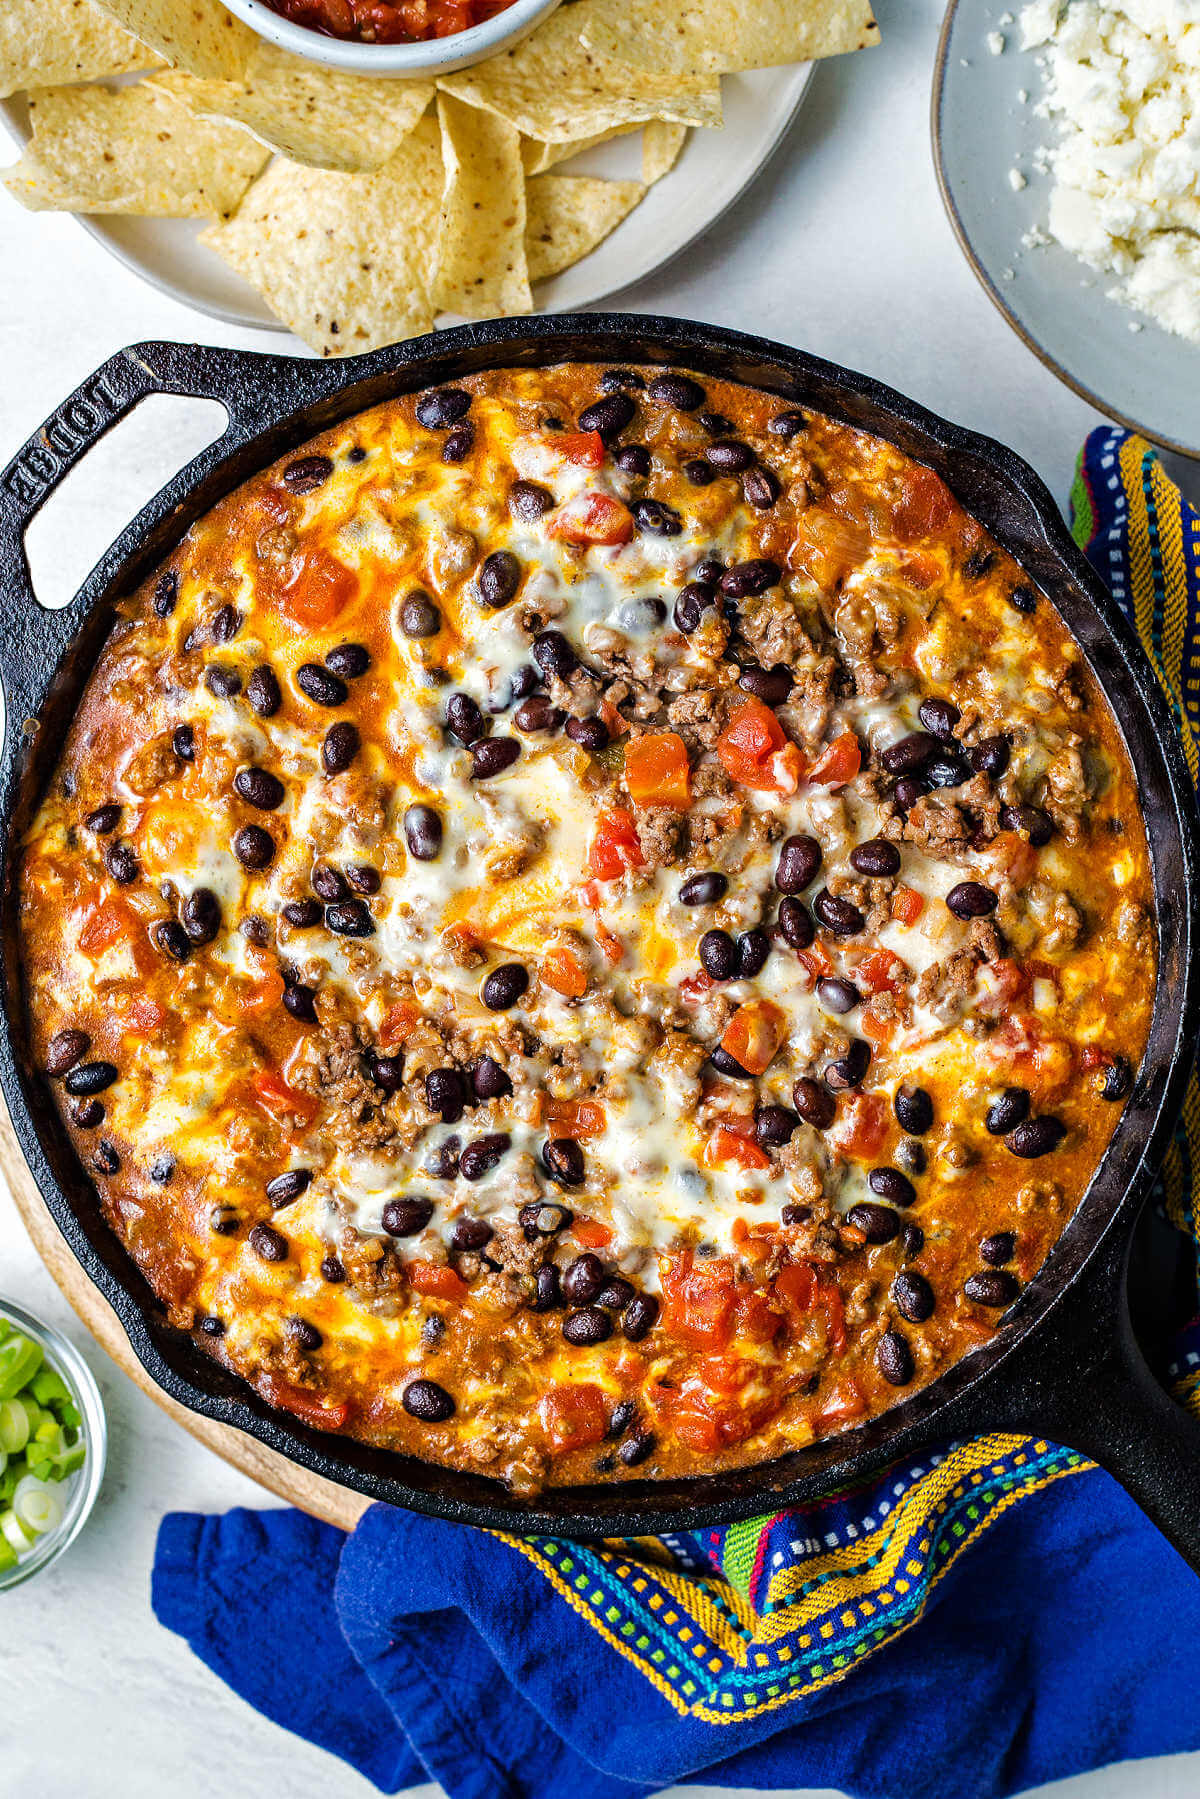 Beef enchilada skillet casserole in a cast iron skillet on a table with a plate of chips and salsa.